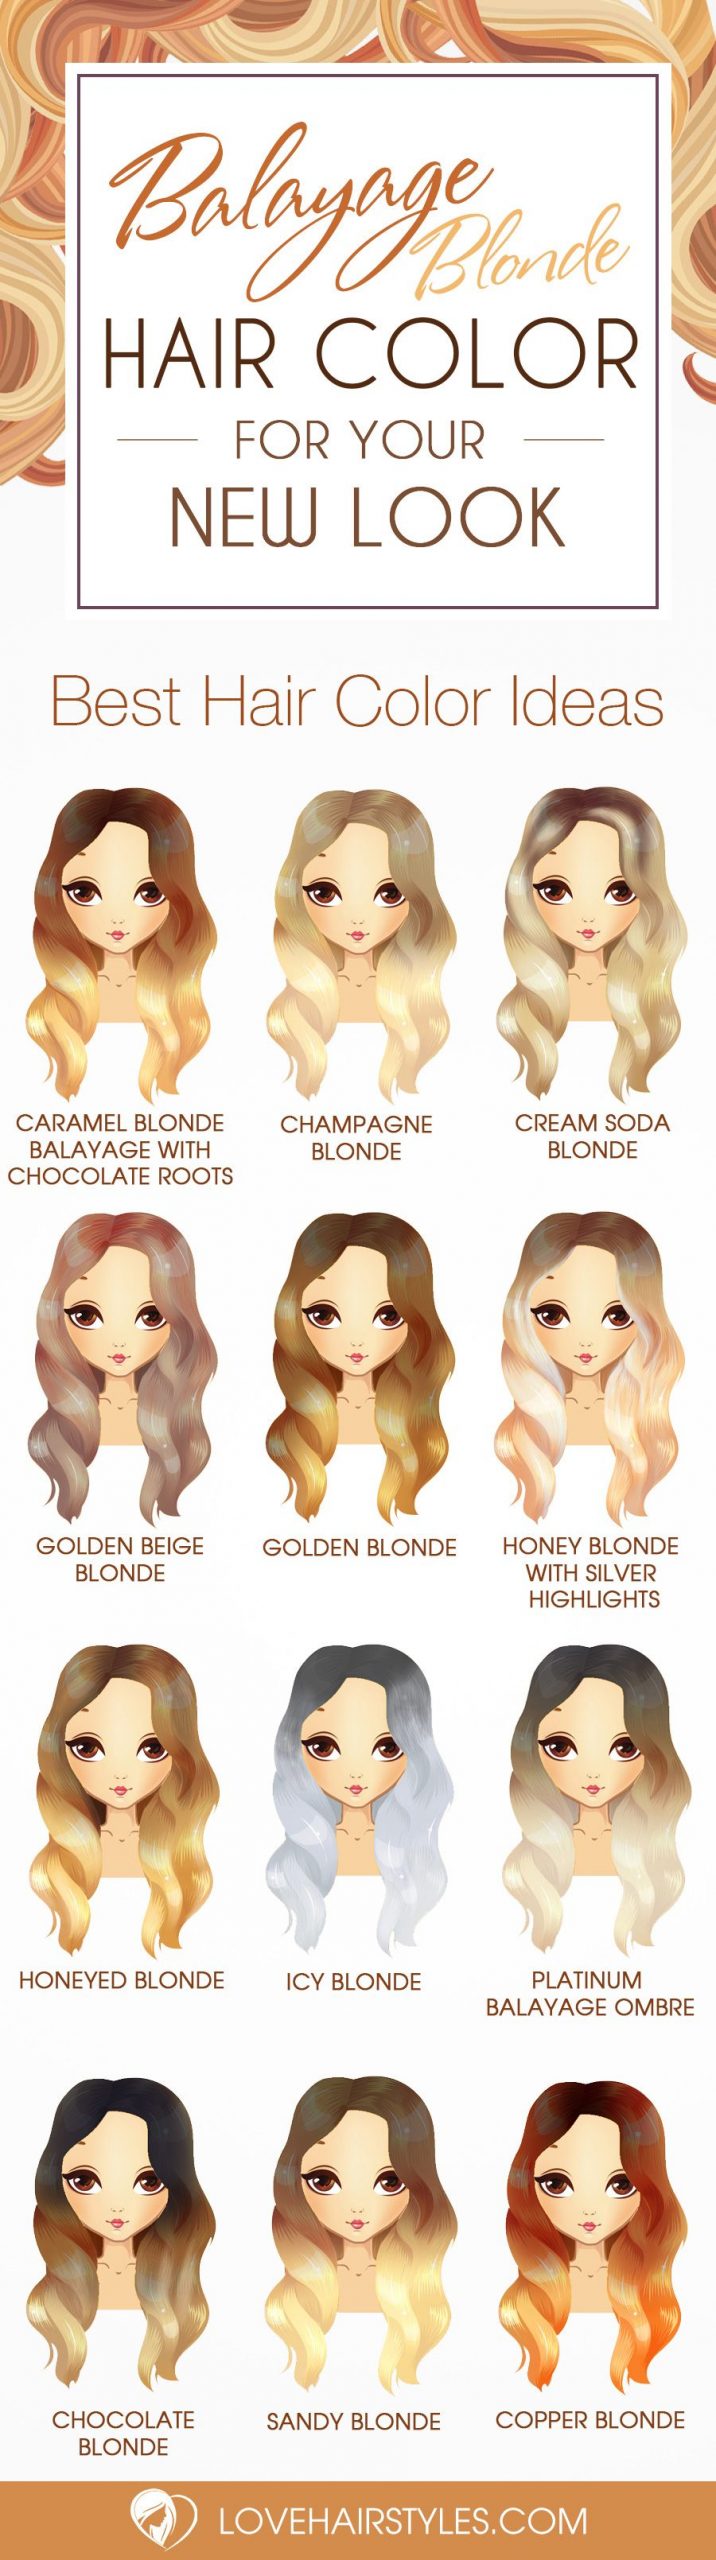 Your Best Choice - Balayage Blond